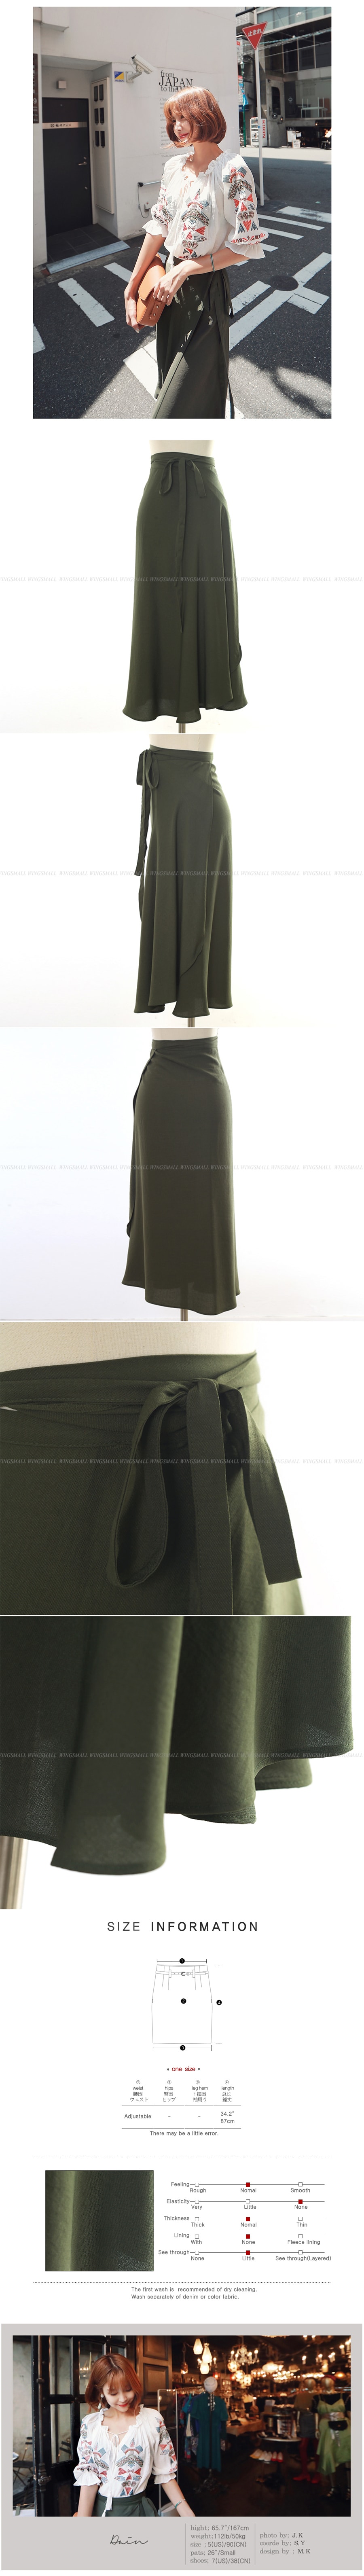 [New Arrival] Solid Wrap Long Skirt #Khaki One Size(S-M)